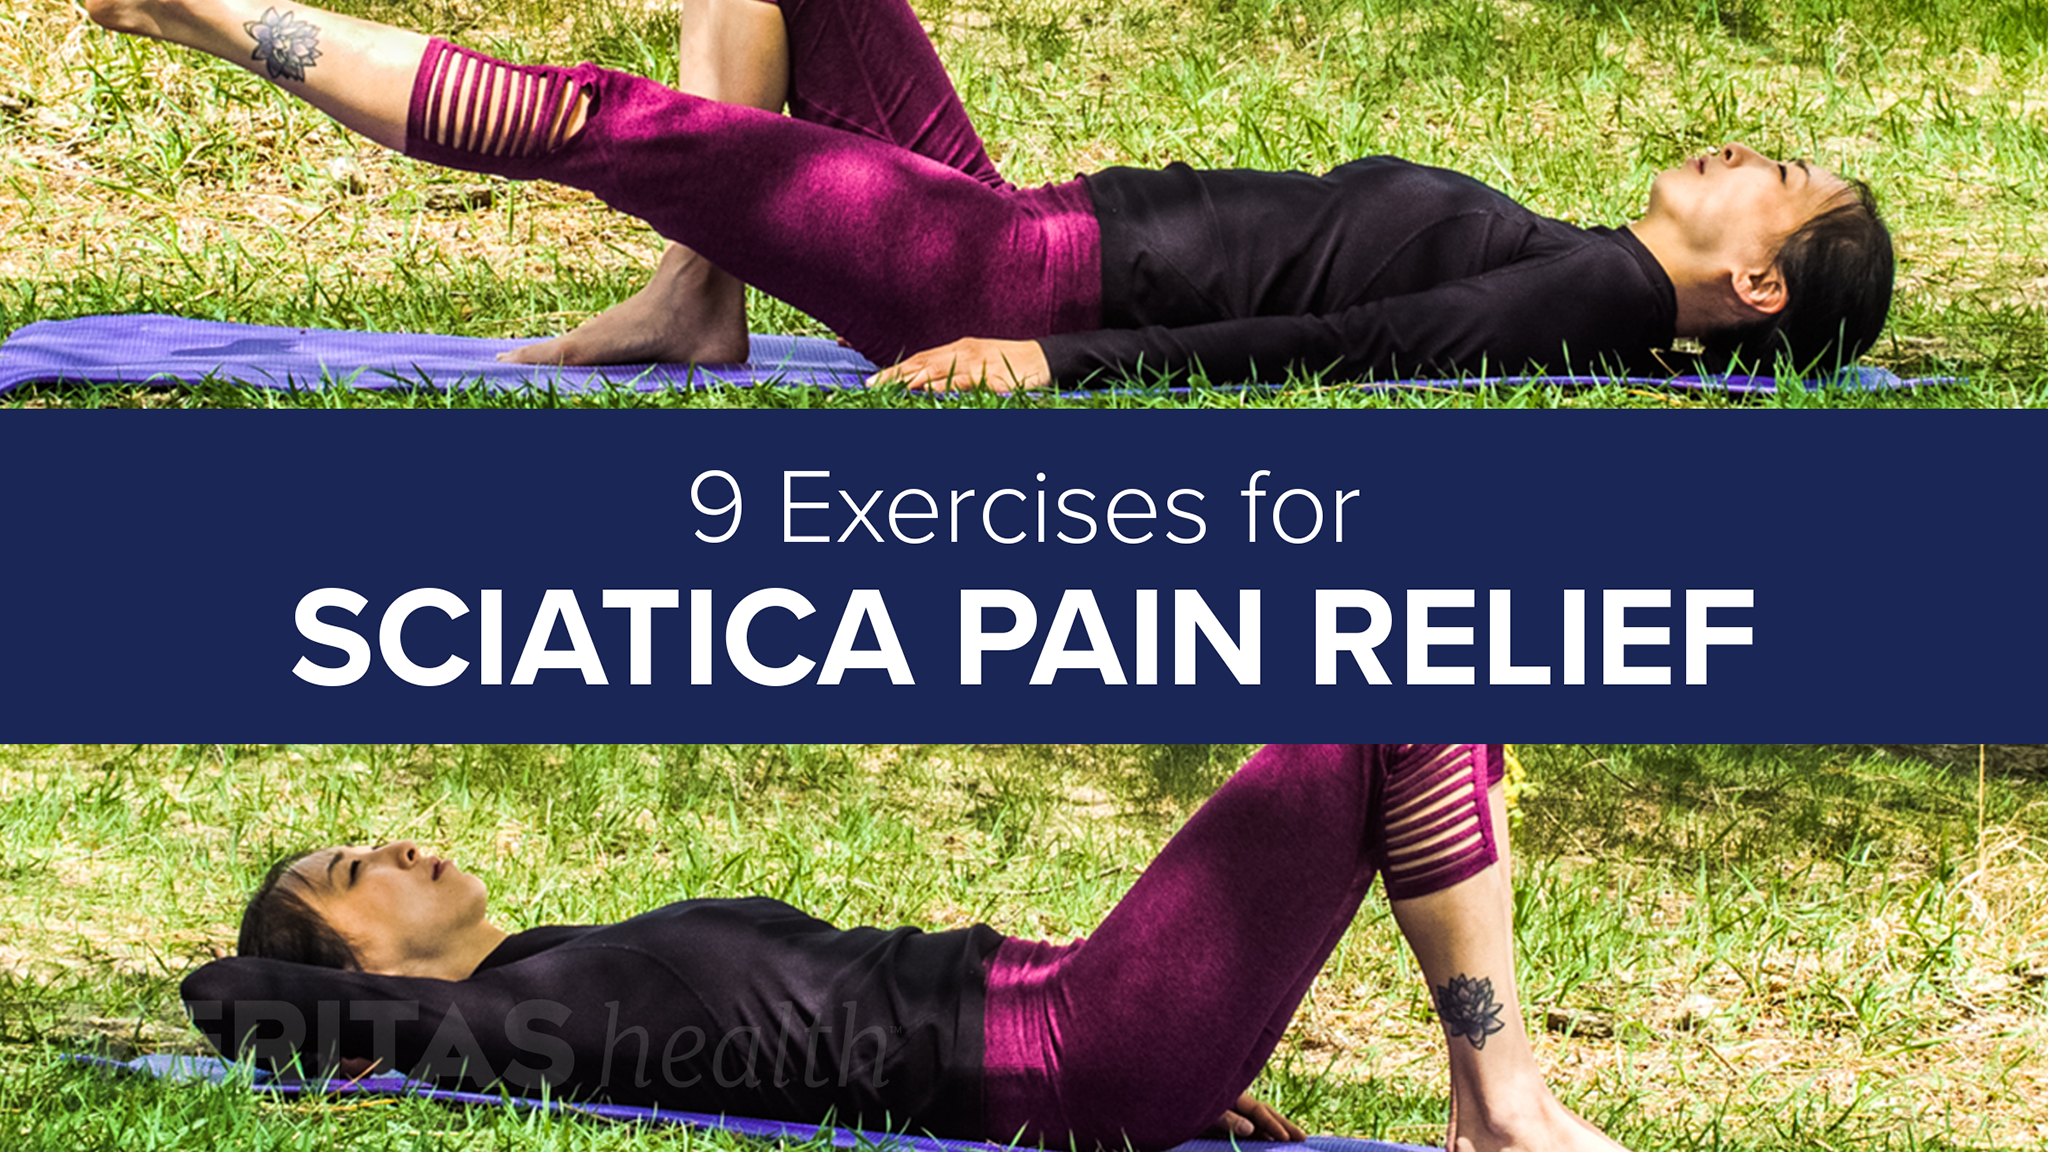 Dr John Decruz Orthopaedic , Interventional Pain and Spine Specialist -  HERE'S A FEW YOGA POSES & STRETCHIGNS TO TRY OUT AT HOME FOR SCIATIC PAIN  MANAGEMENT. BE SURE TO FOLLOW YOUR